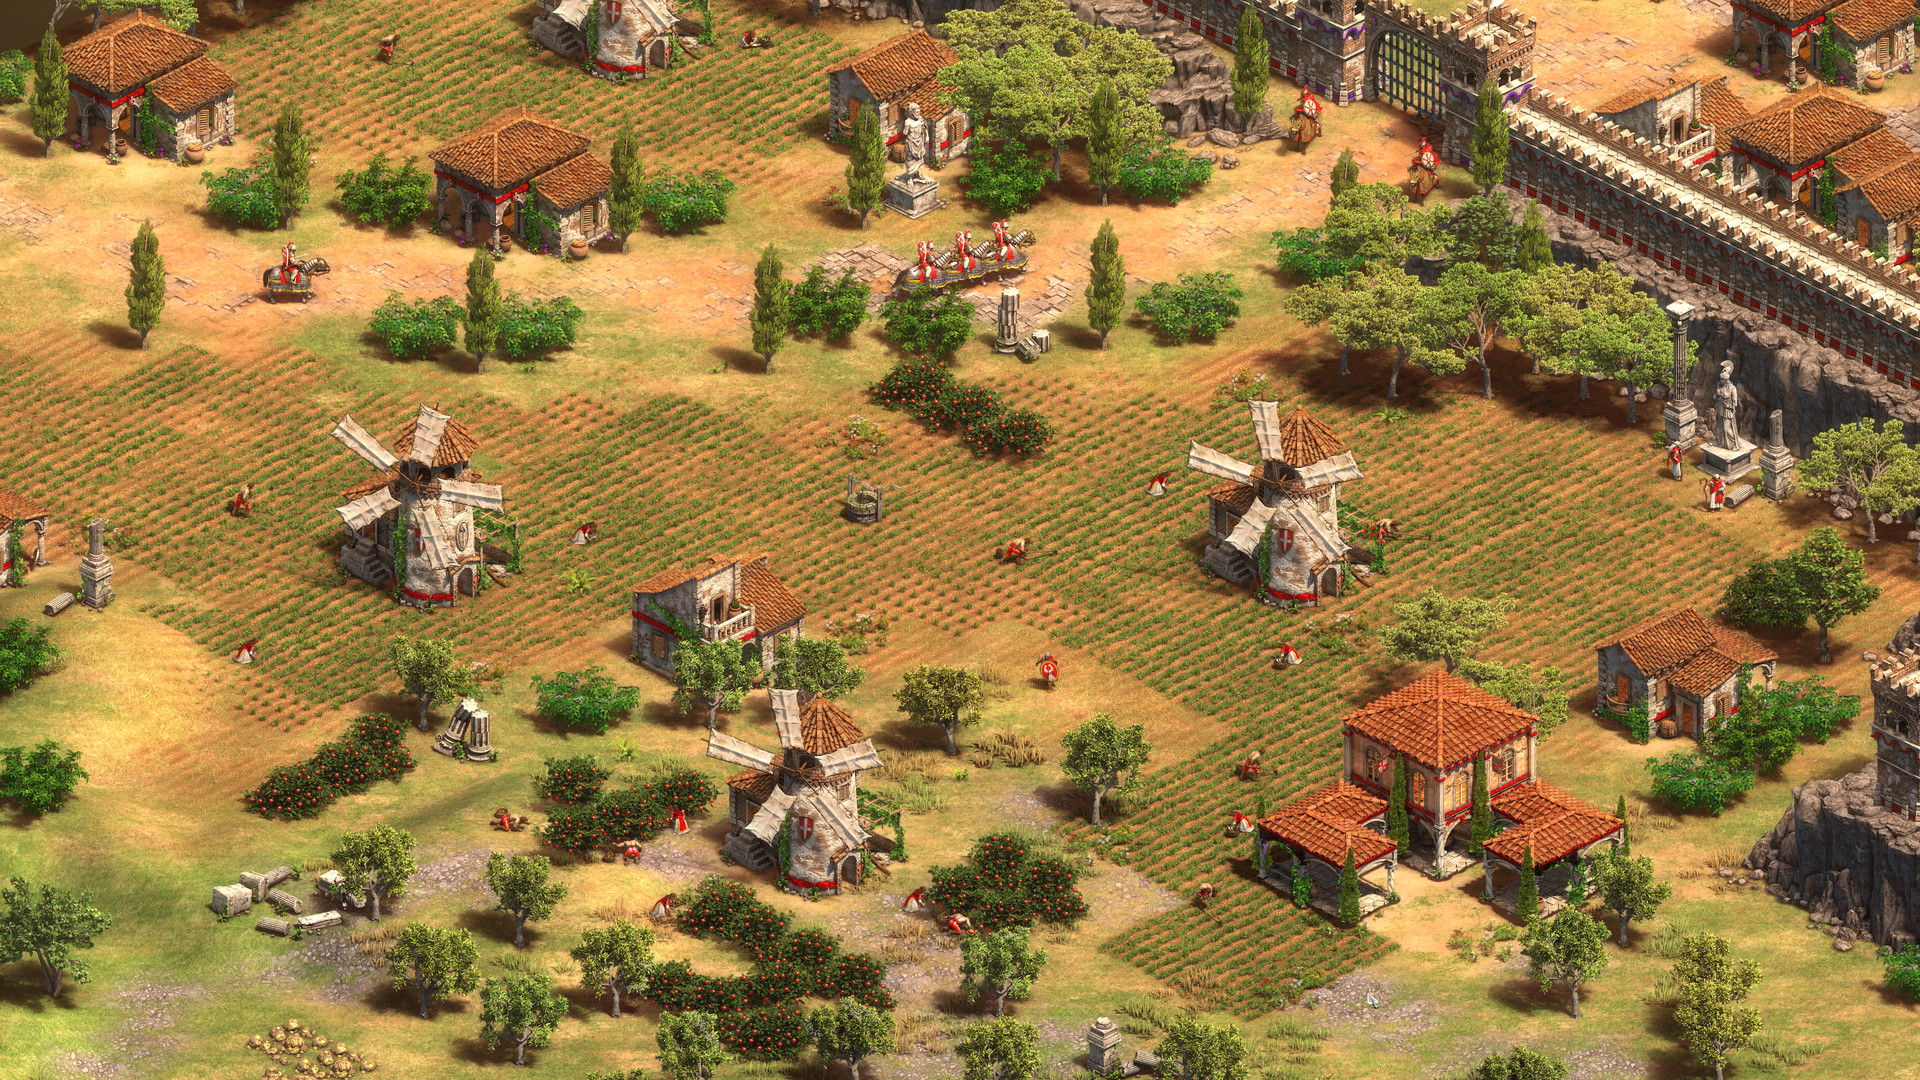 Save 33% on Age of Empires II: Definitive Edition on Steam